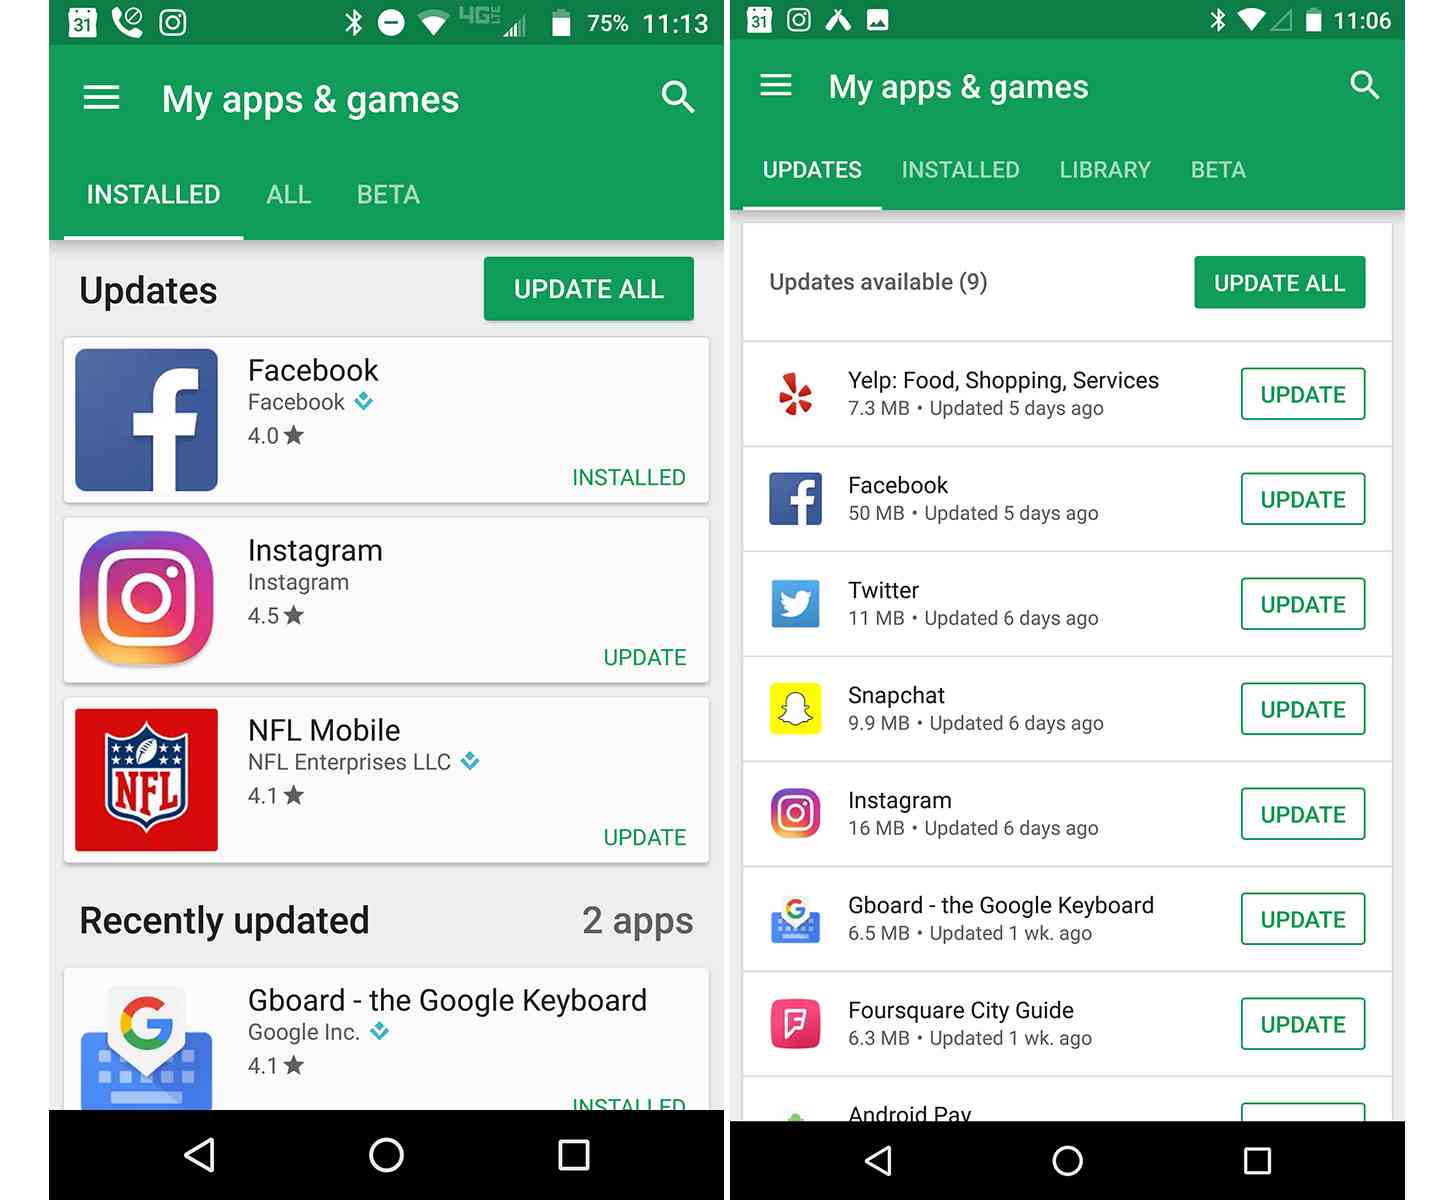 Google updating design of 'My apps & games' section in Play Store for Android | PhoneDog